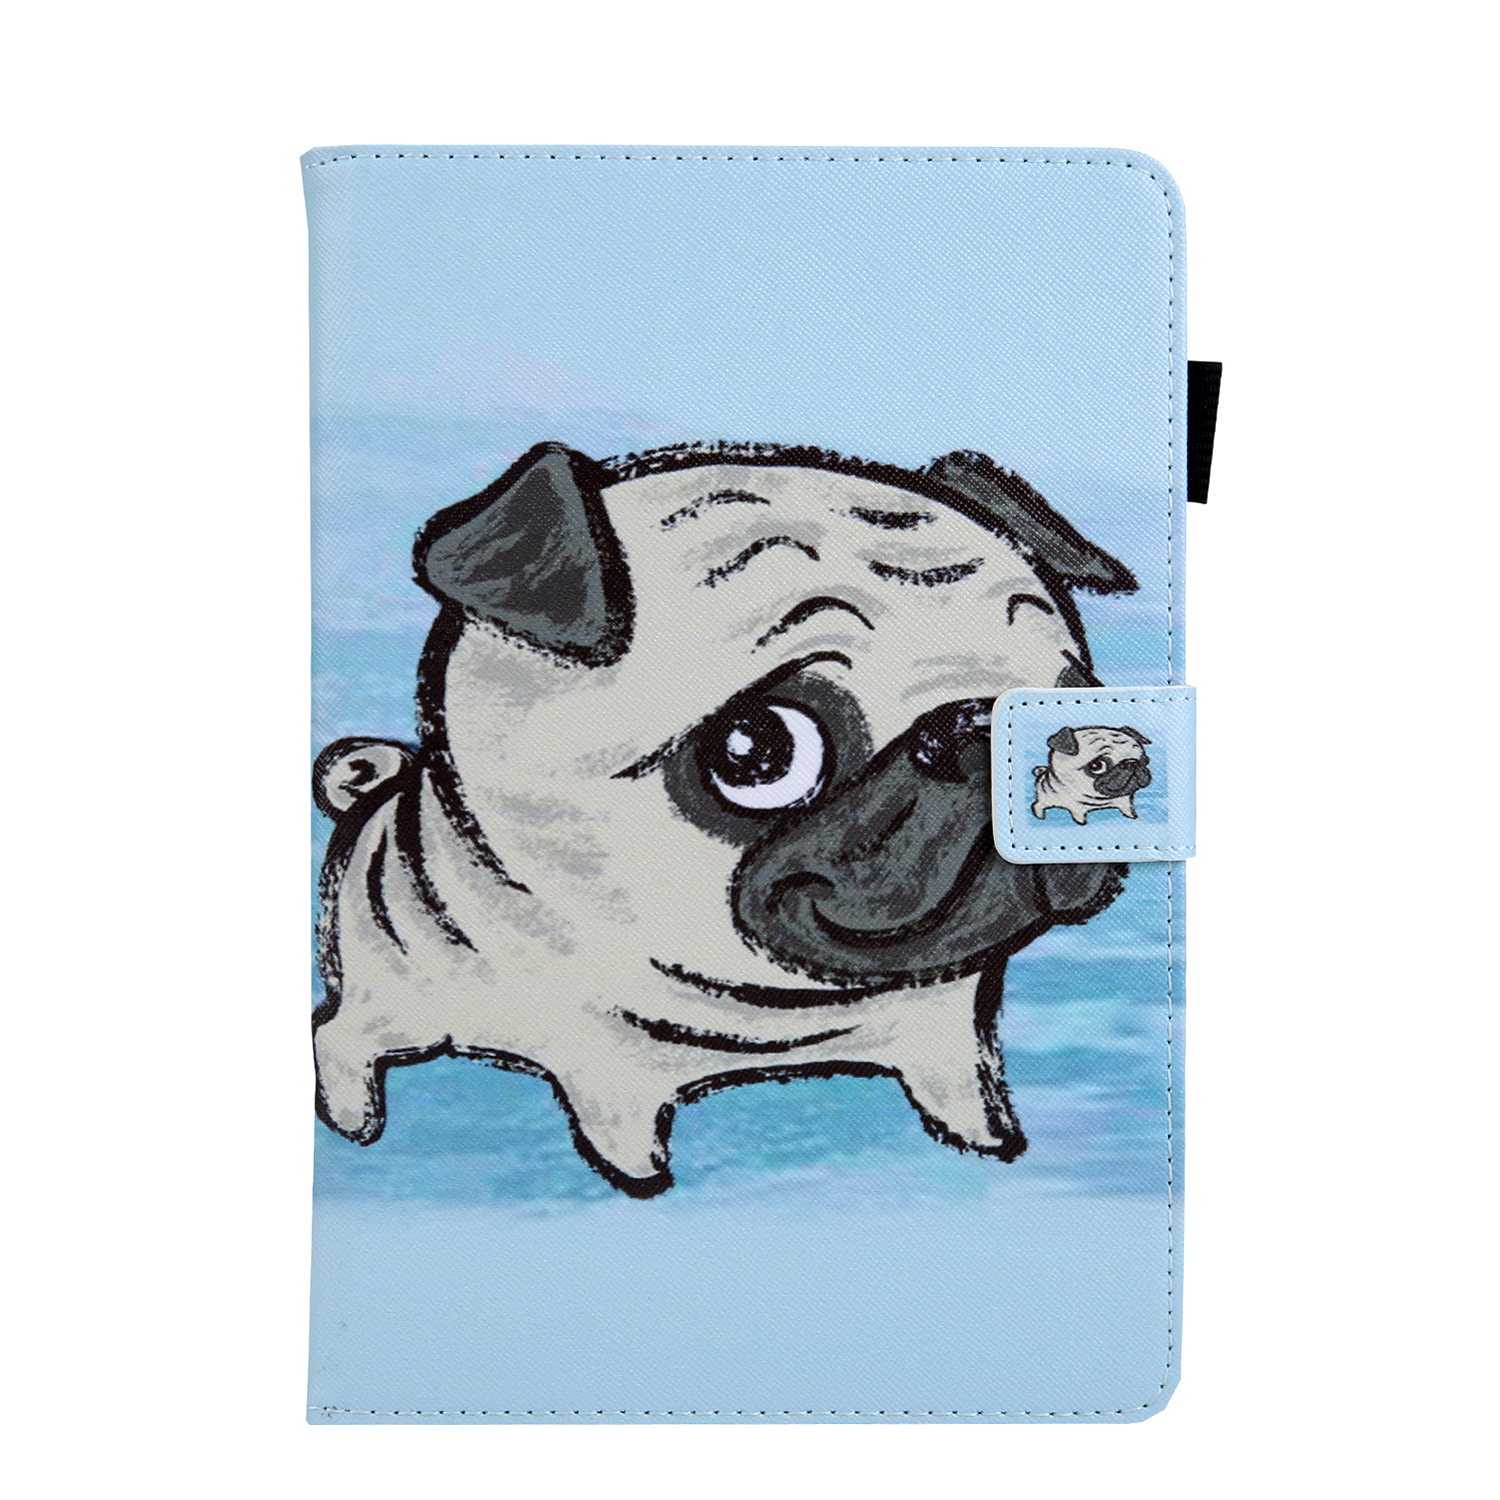 10.1 inch Universal Tablet Case, Allytech PU Leather Flip Wallet Kids Case Smart Folio Stand Cover for Samsung Galaxy Tab A 10.1 Tab E 9.6 Tab S4 10.5/ Lenovo Tab/ Fire HD 10 and More, Small Dog - image 2 of 3